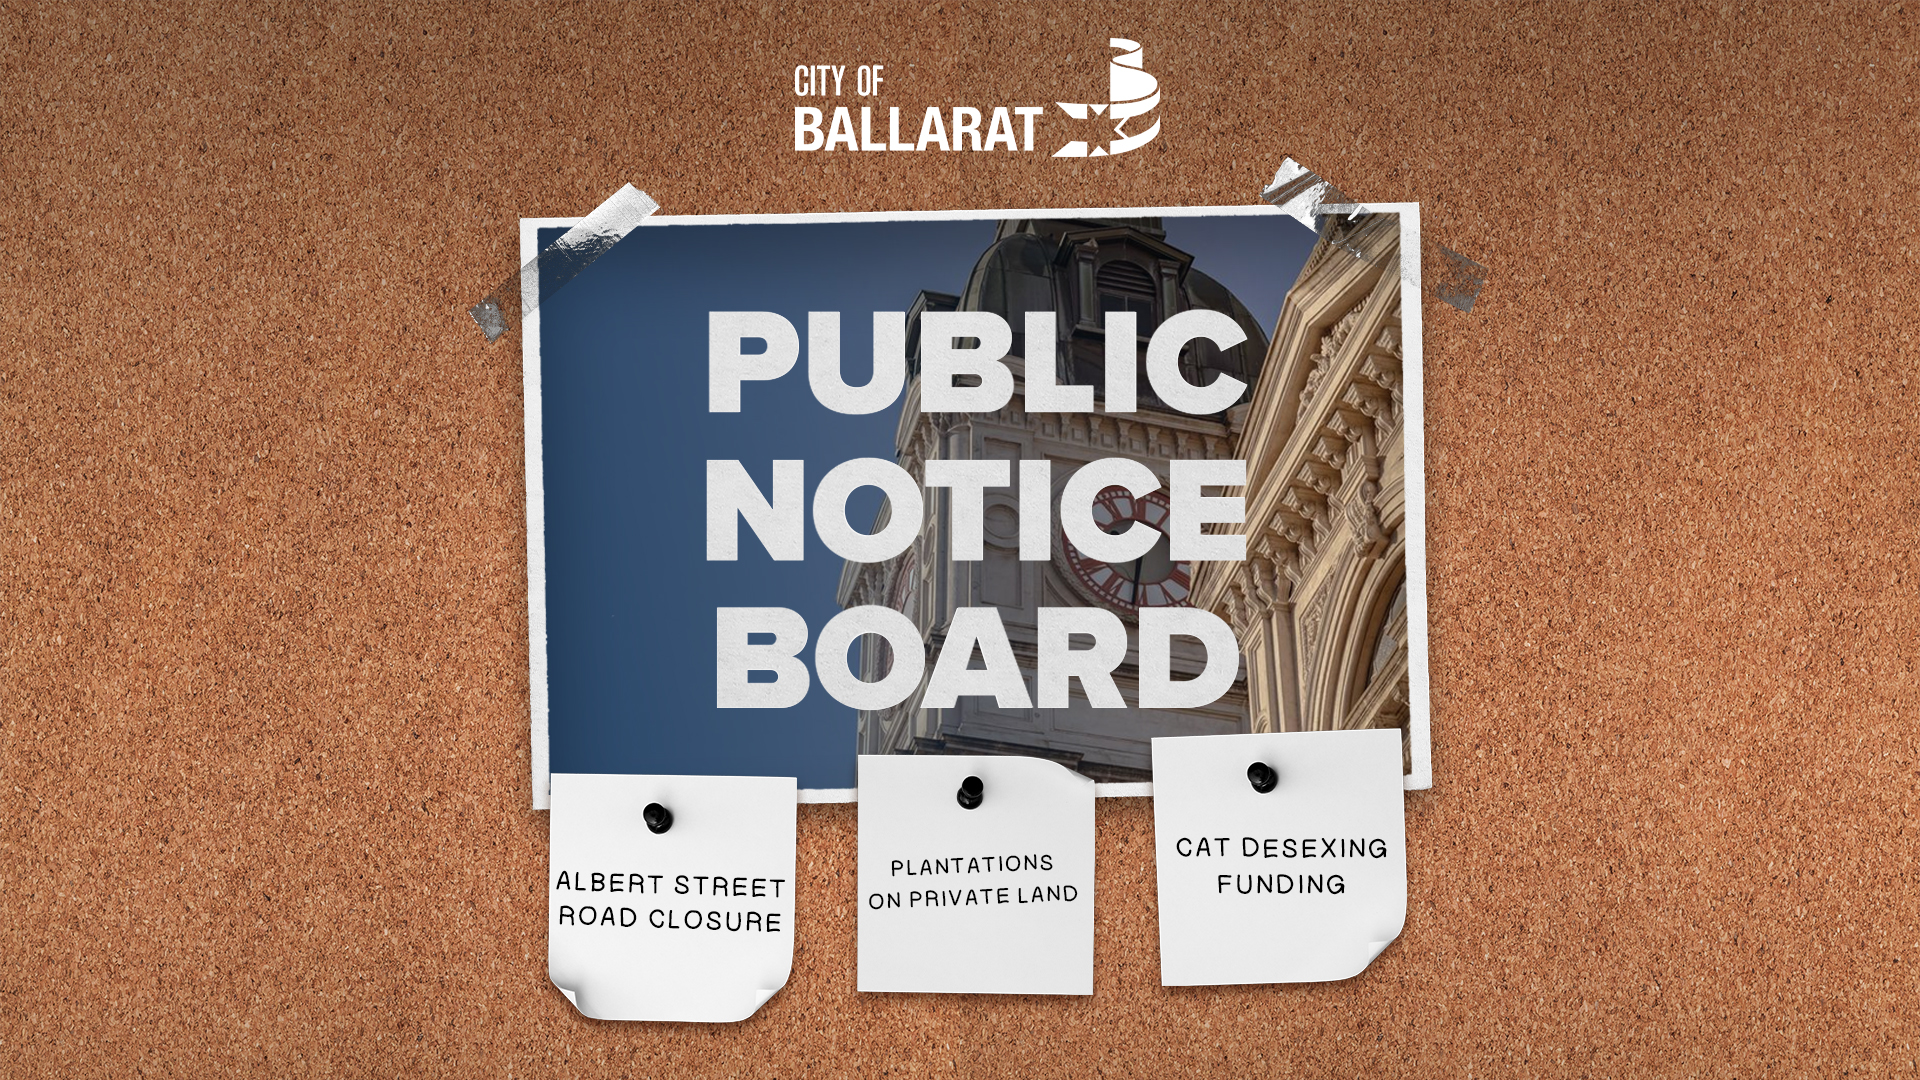 Notice board with Public Notice Board text over an image of Ballarat Town Hall. Three notes underneath with text saying ALBERT STREET ROAD CLOSURE, PLANTATIONS ON PRIVATE LAND, CAT DESEXING FUNDING